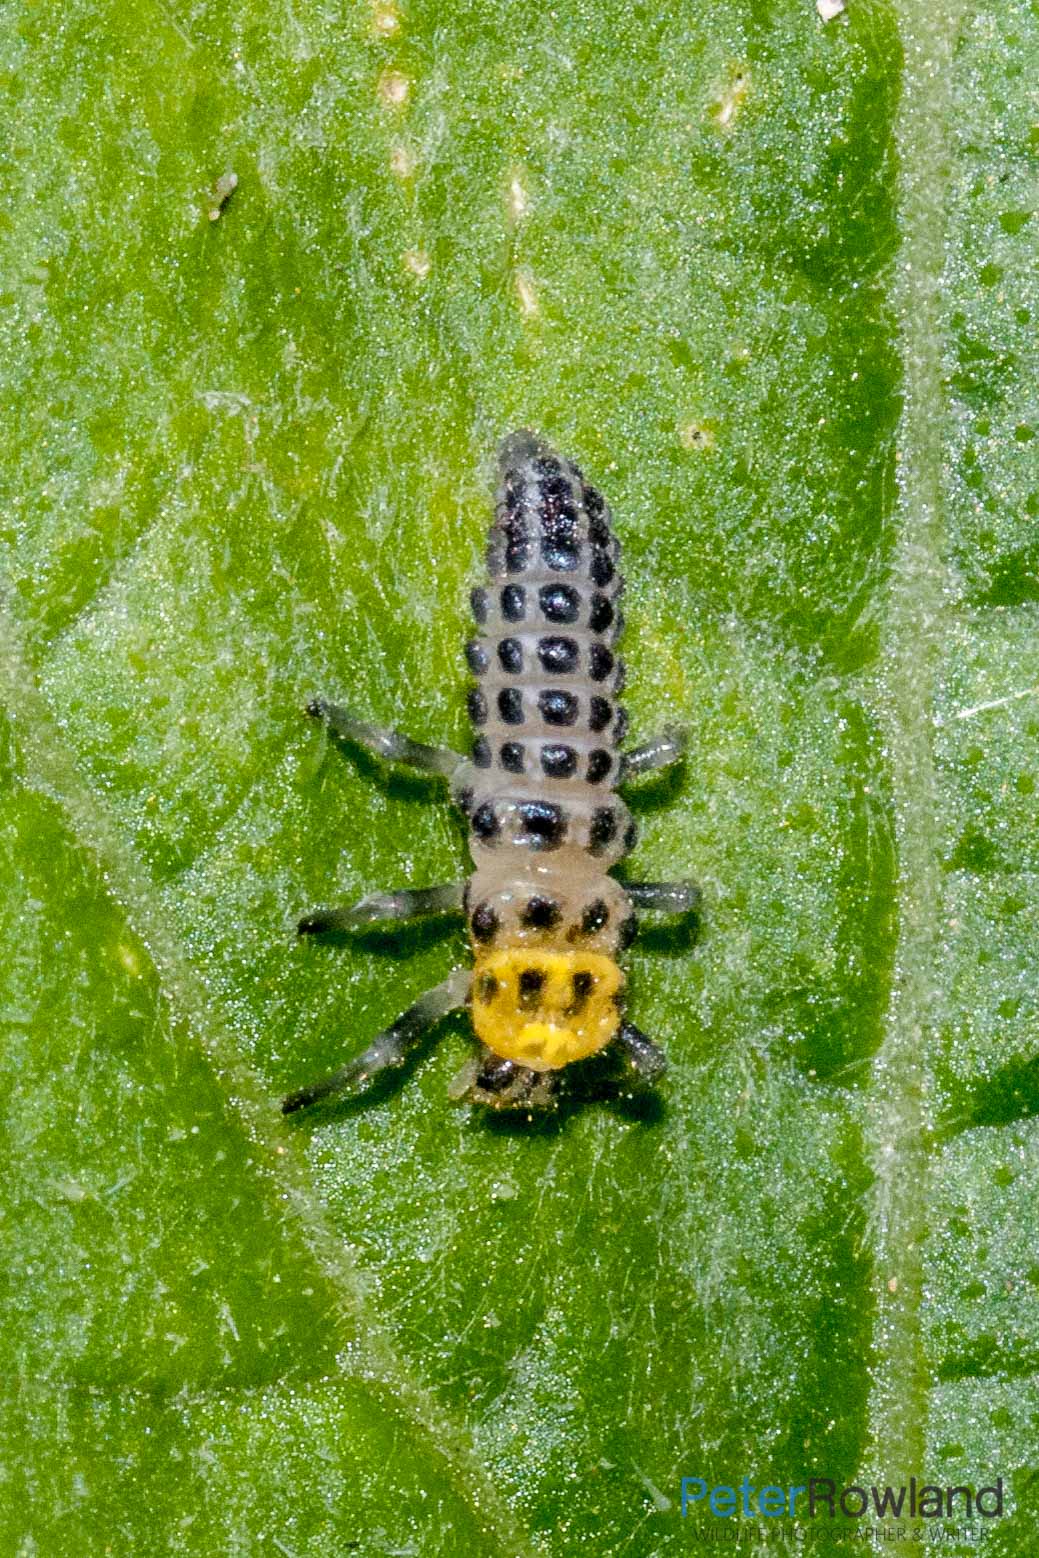 A Fungus-eating Ladybird nymph on a leaf